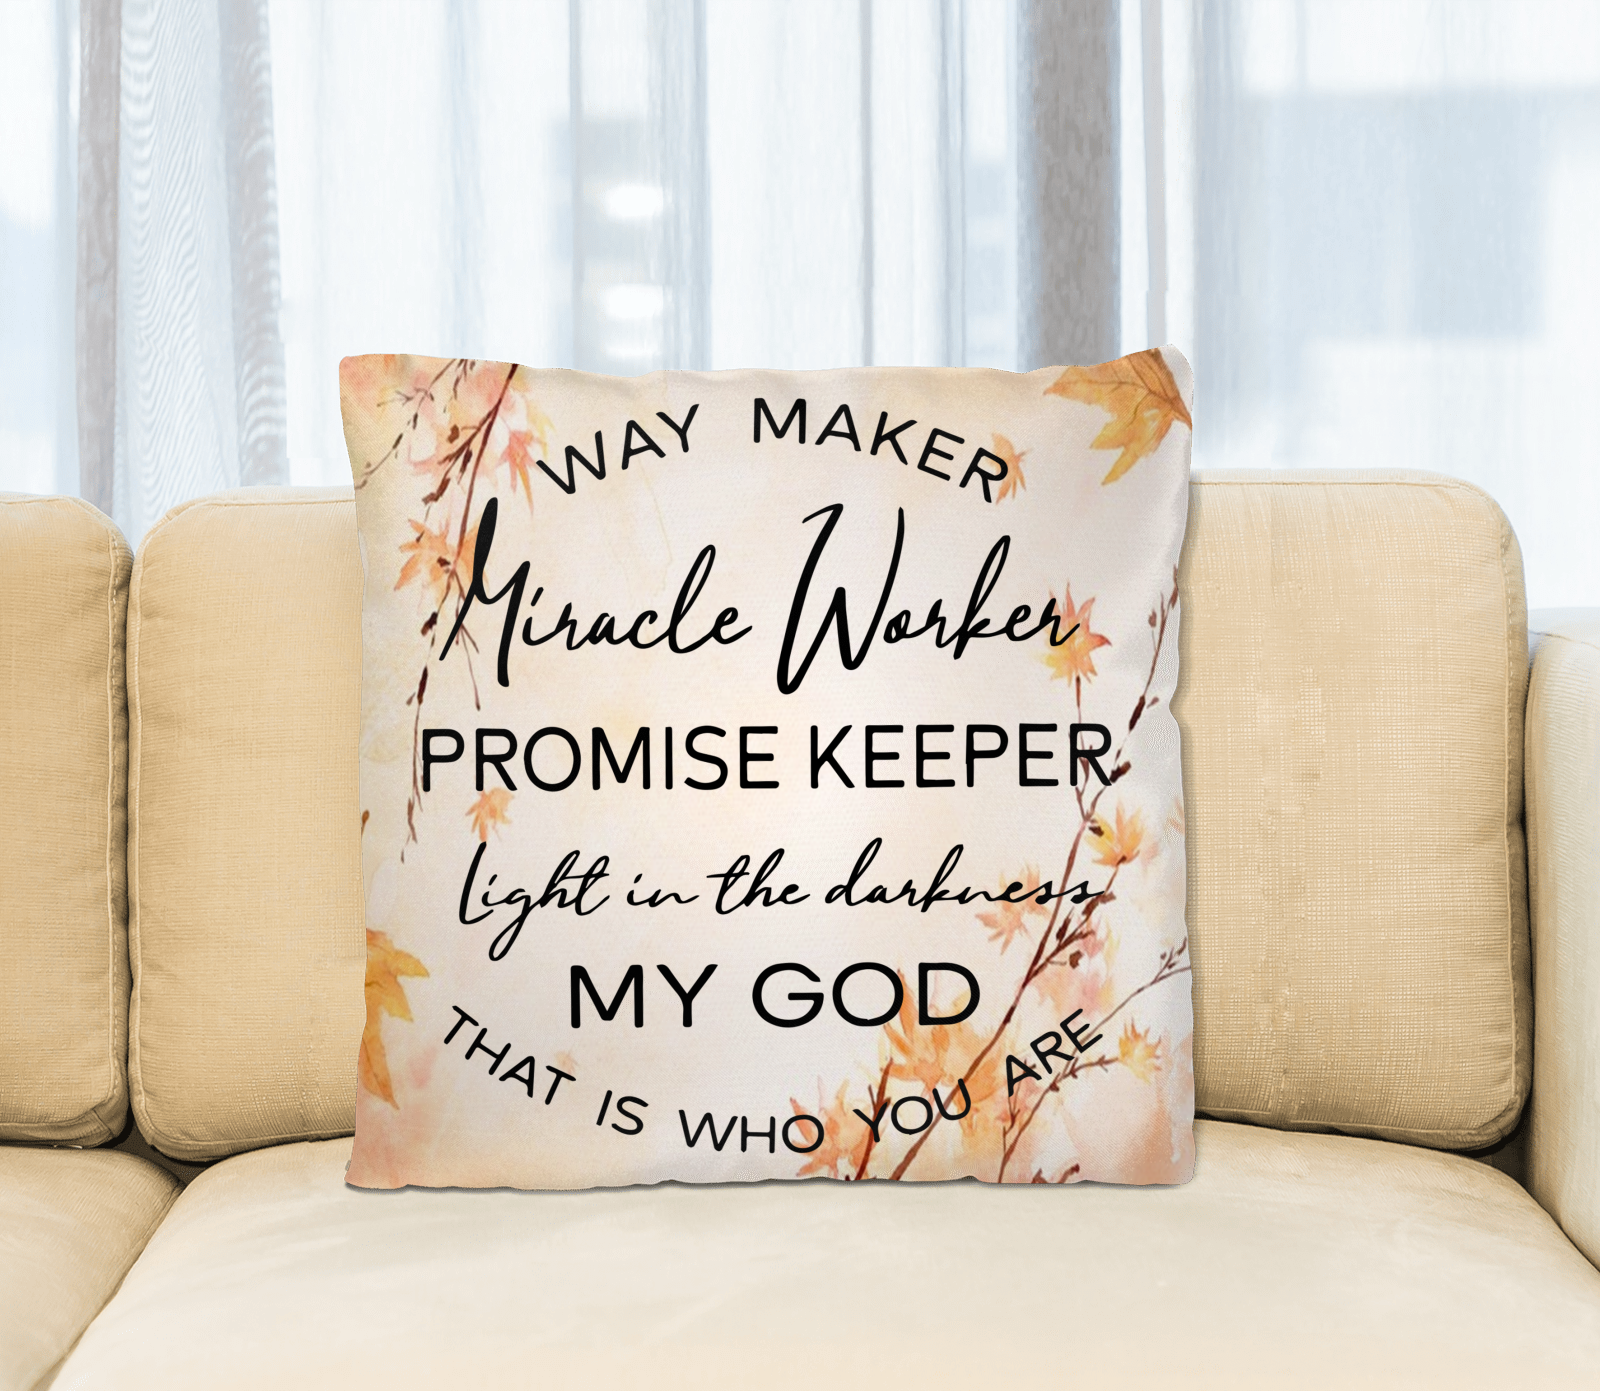 Way Maker Miracle Worker Square Pillow